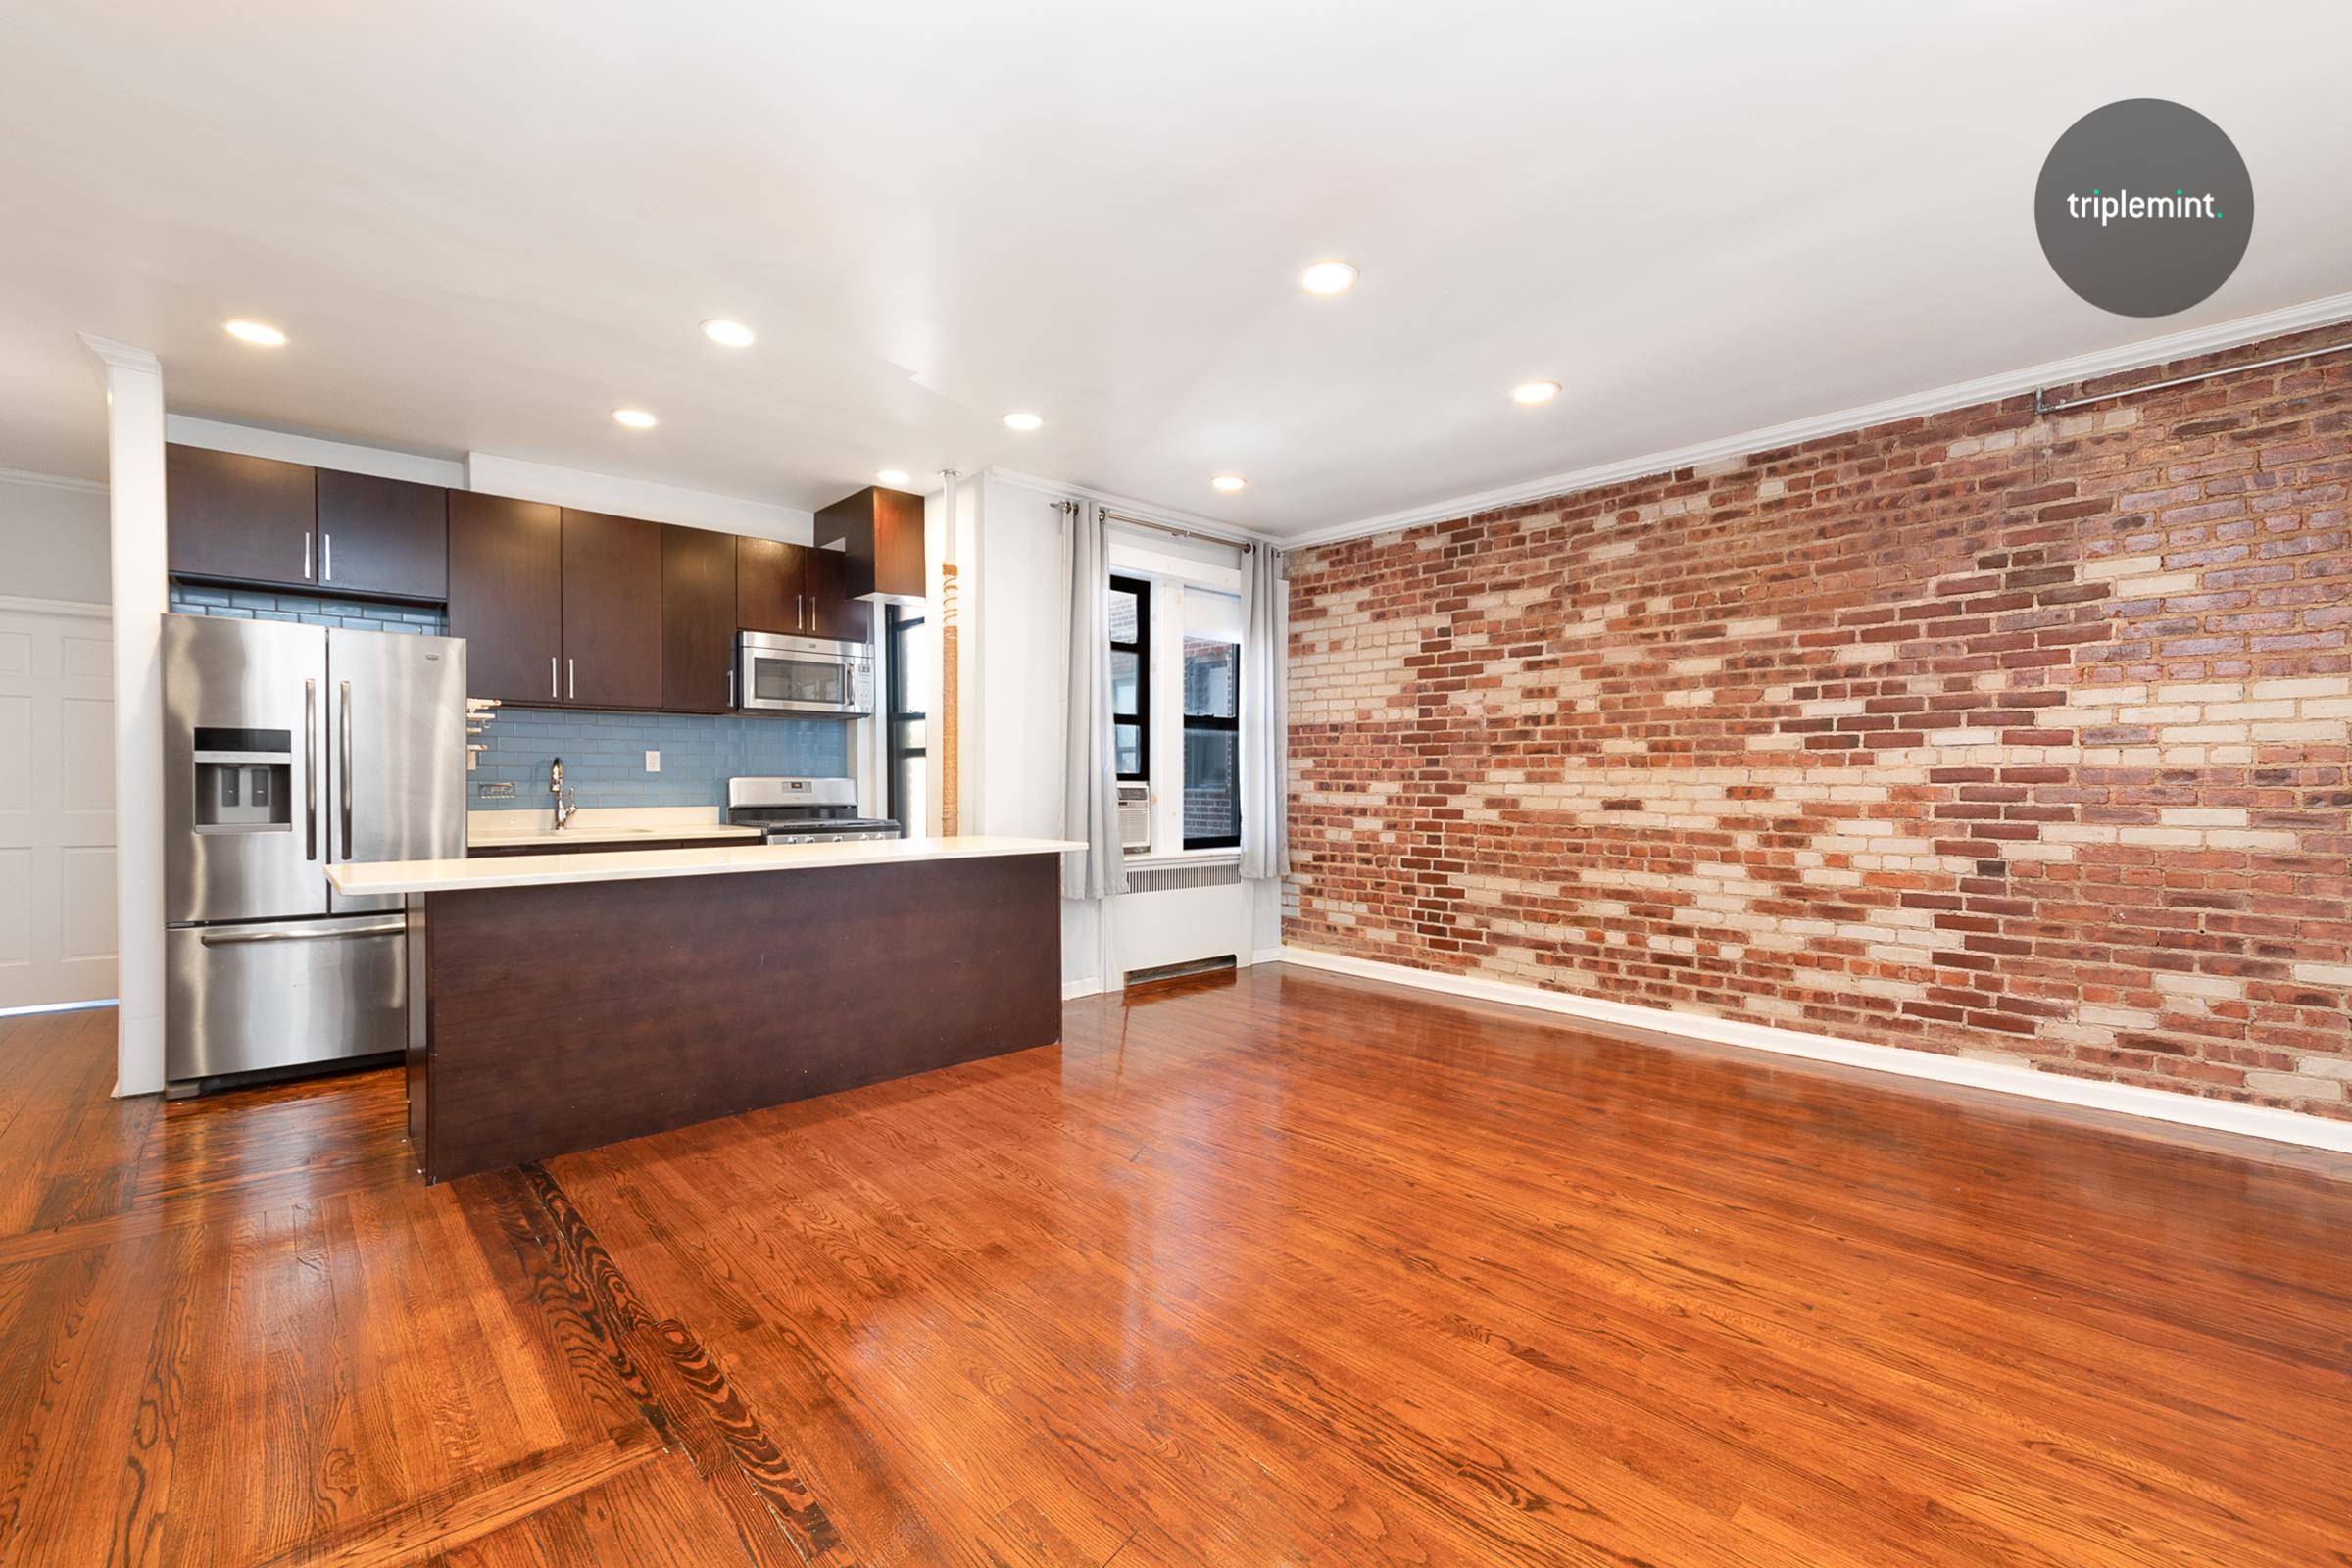 This is a stunning 1BR apartment is right off the 30th Avenue stop of the N and W trains.